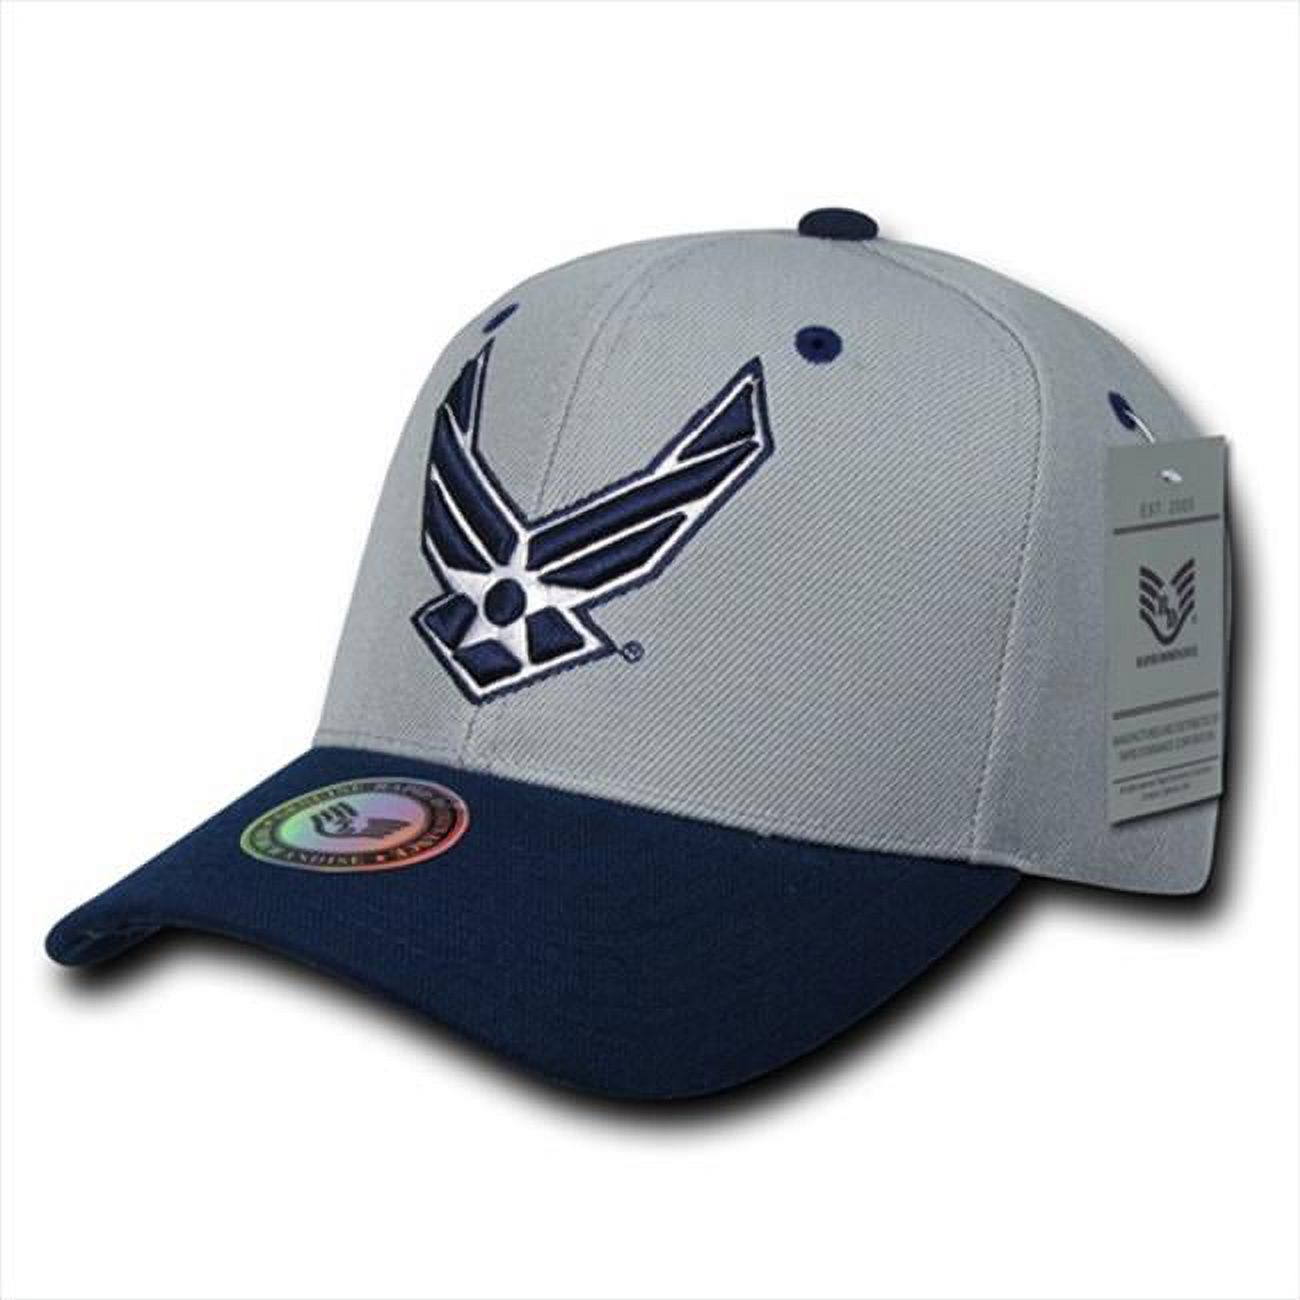 Rapid Dominance S015-AIRFORCE Workout, Branch Caps, Air Force - image 1 of 2